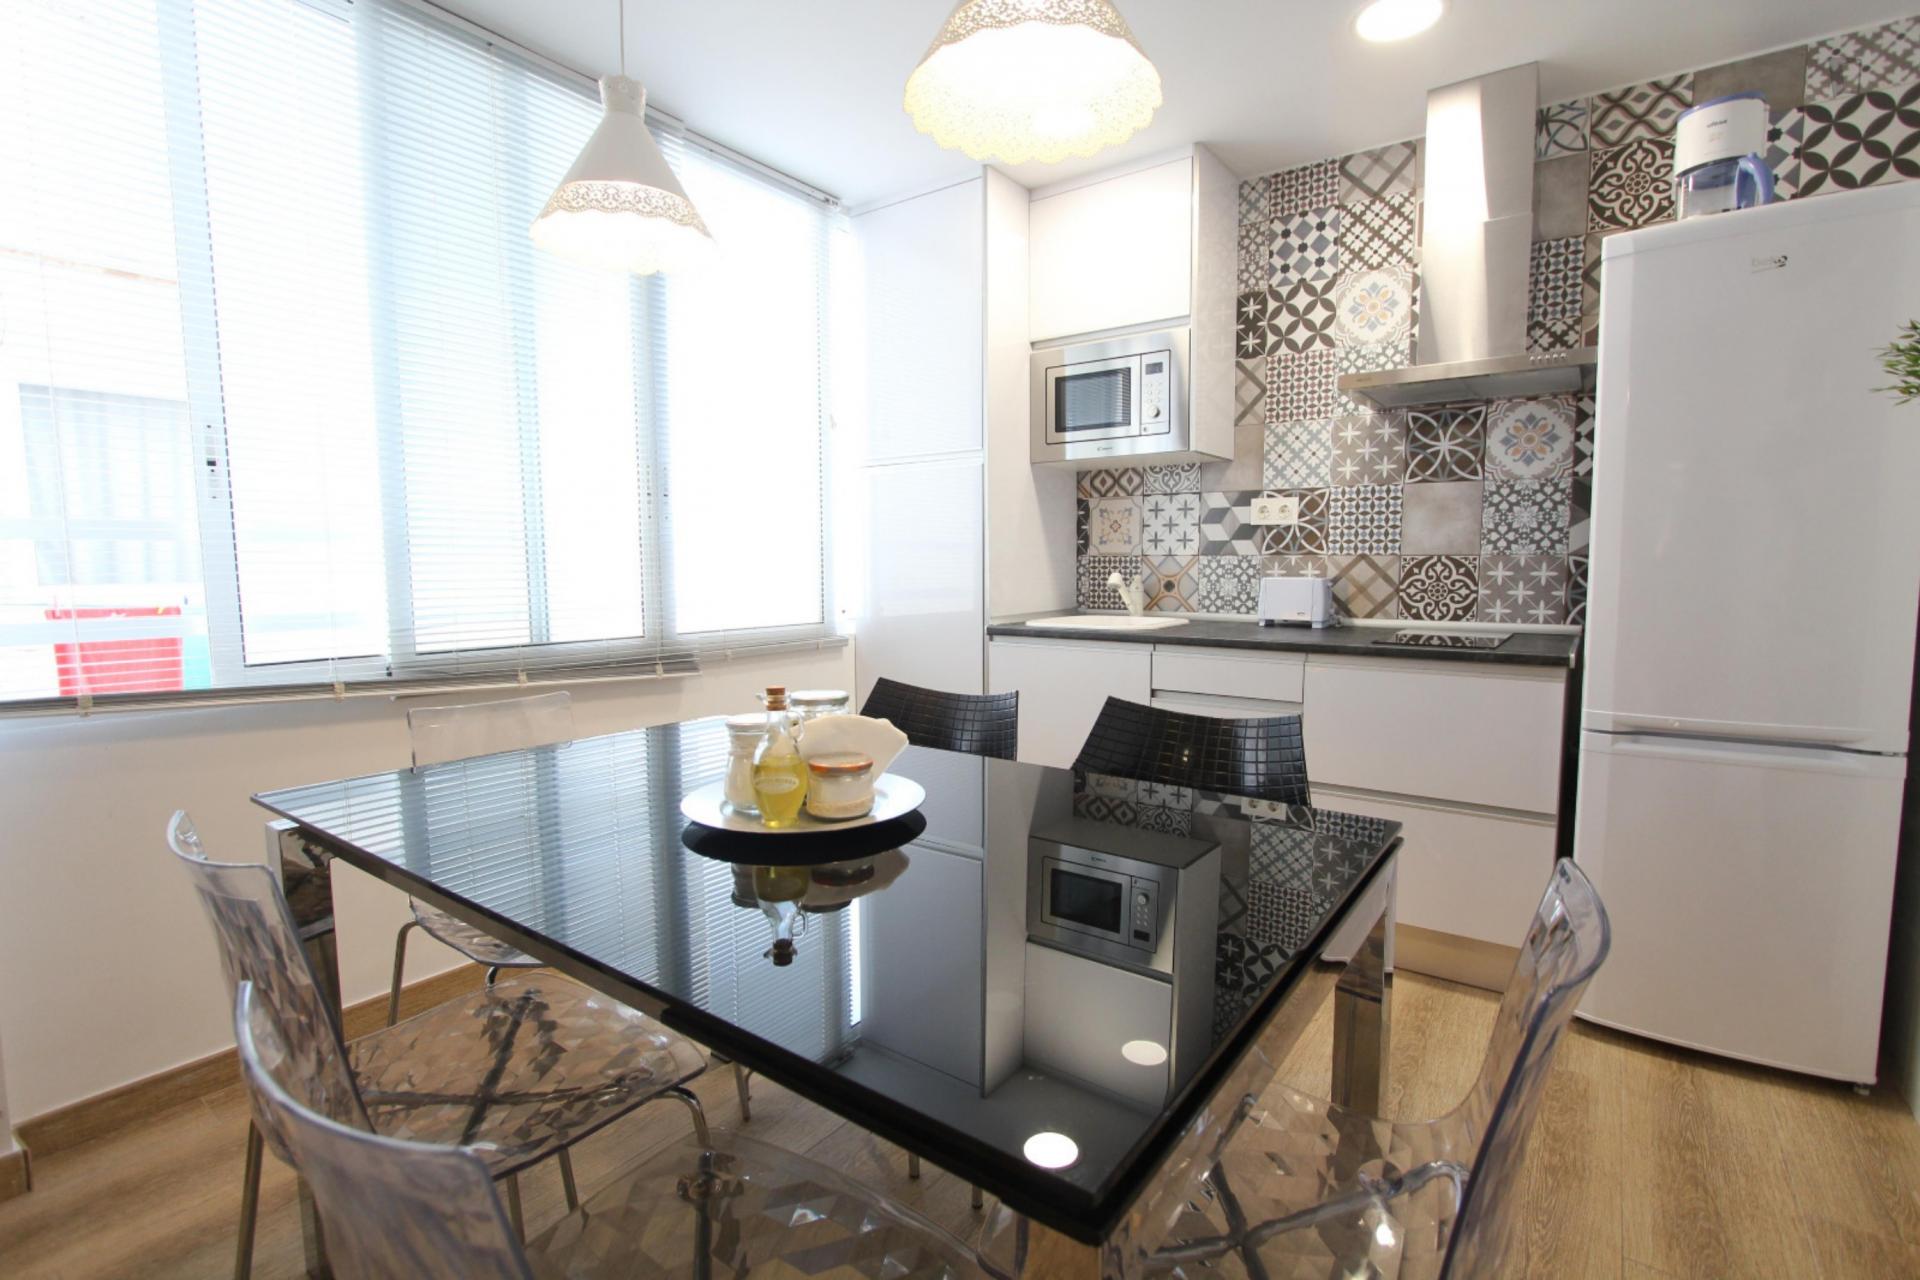 Ceres - Shared apartment in Alicante for expats